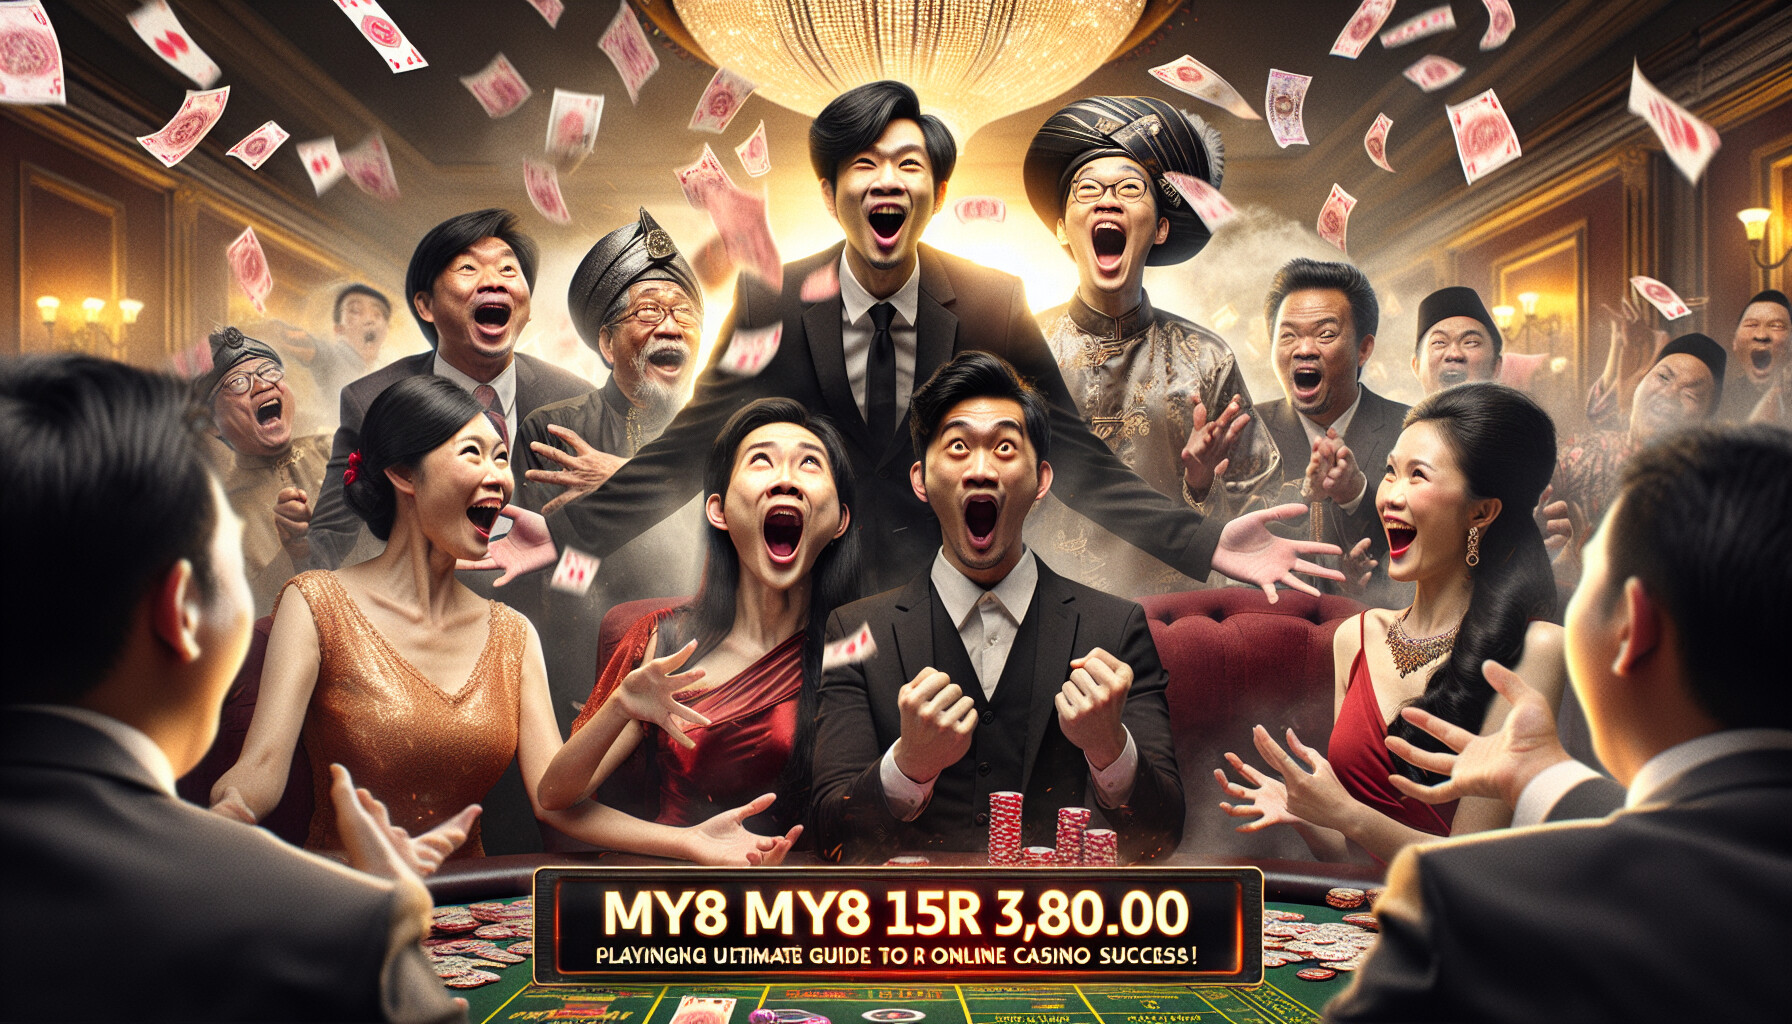 Uncover the exhilarating journey of striking gold on 918kiss! 🎰 Bet MYR 150.00 and win BIG up to MYR 3,810.00! 💰 Experience the adrenaline rush now! 🌟💸 #918kiss #winbig